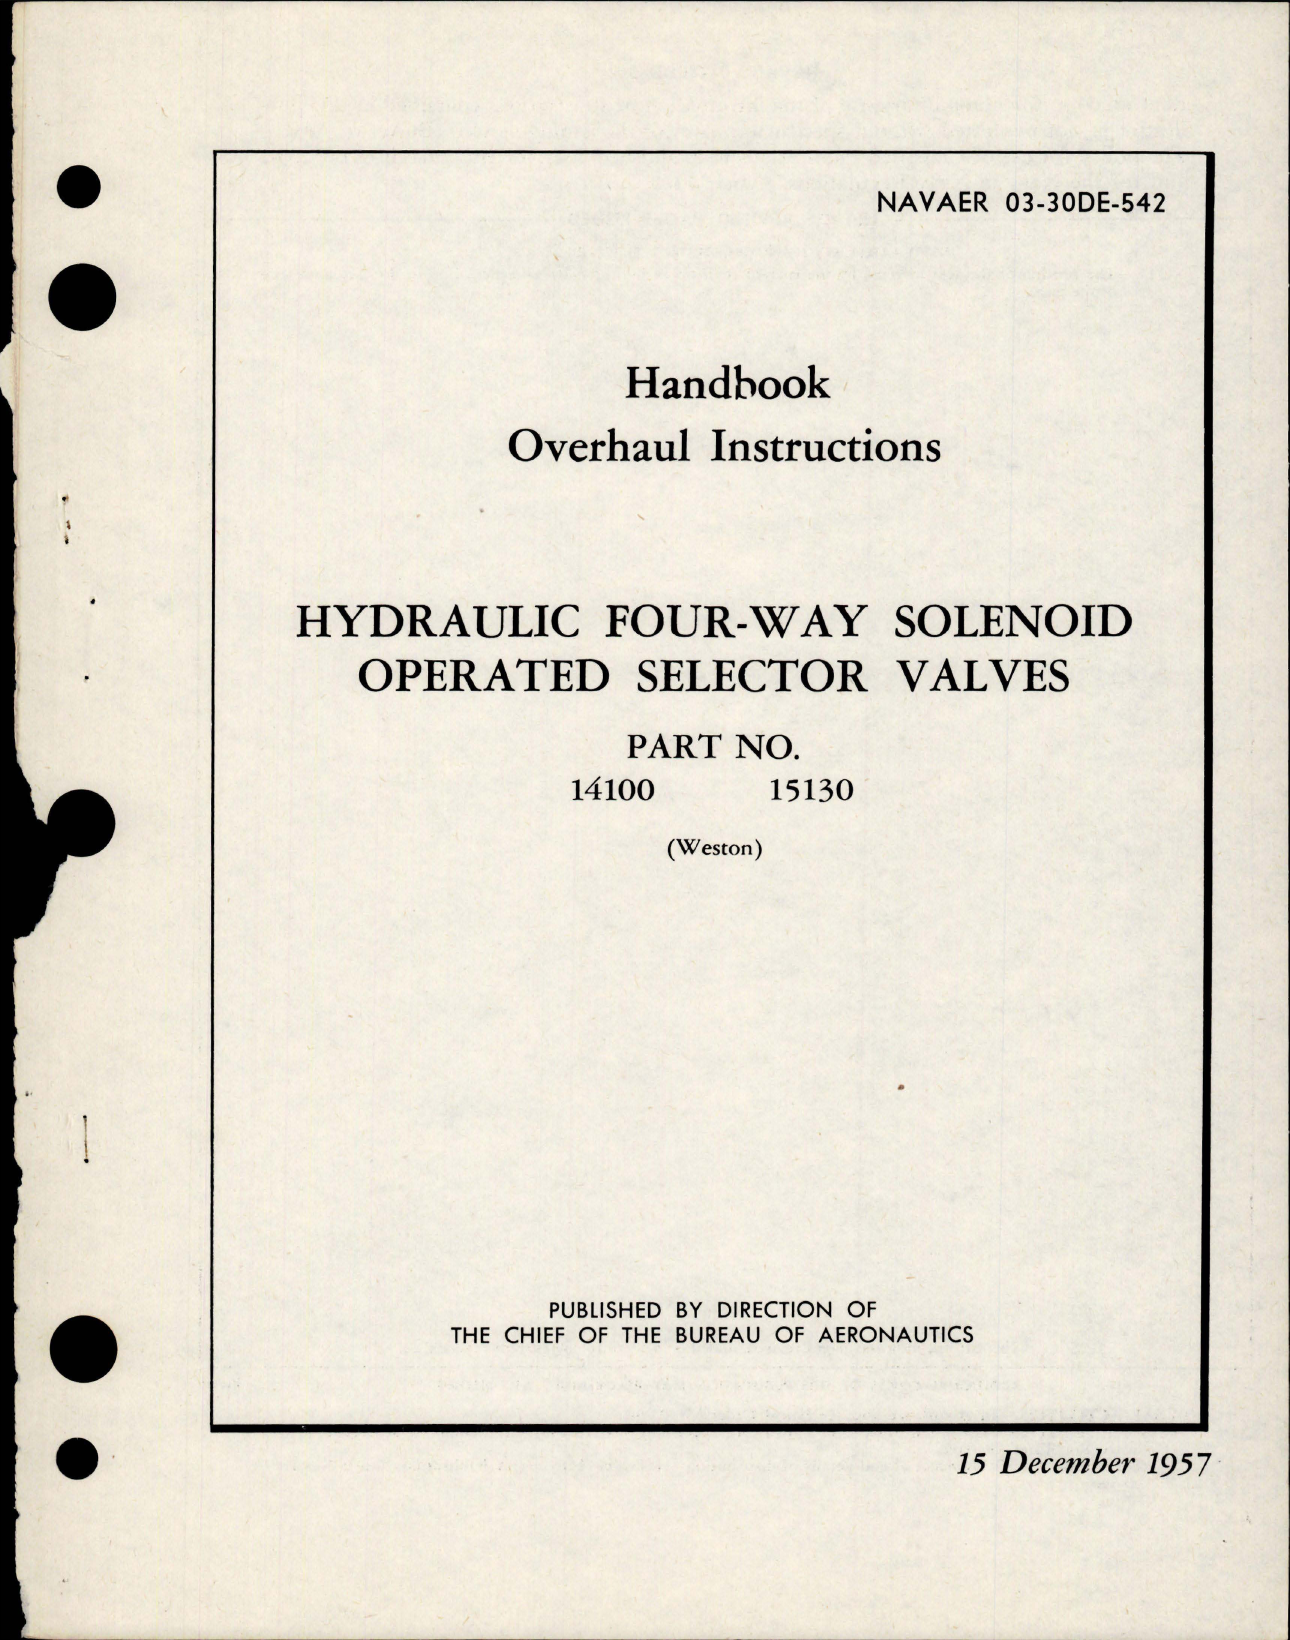 Sample page 1 from AirCorps Library document: Overhaul Instructions for Hydraulic Four Way Solenoid Operated Selector Valves - Parts 14100 and 15130 